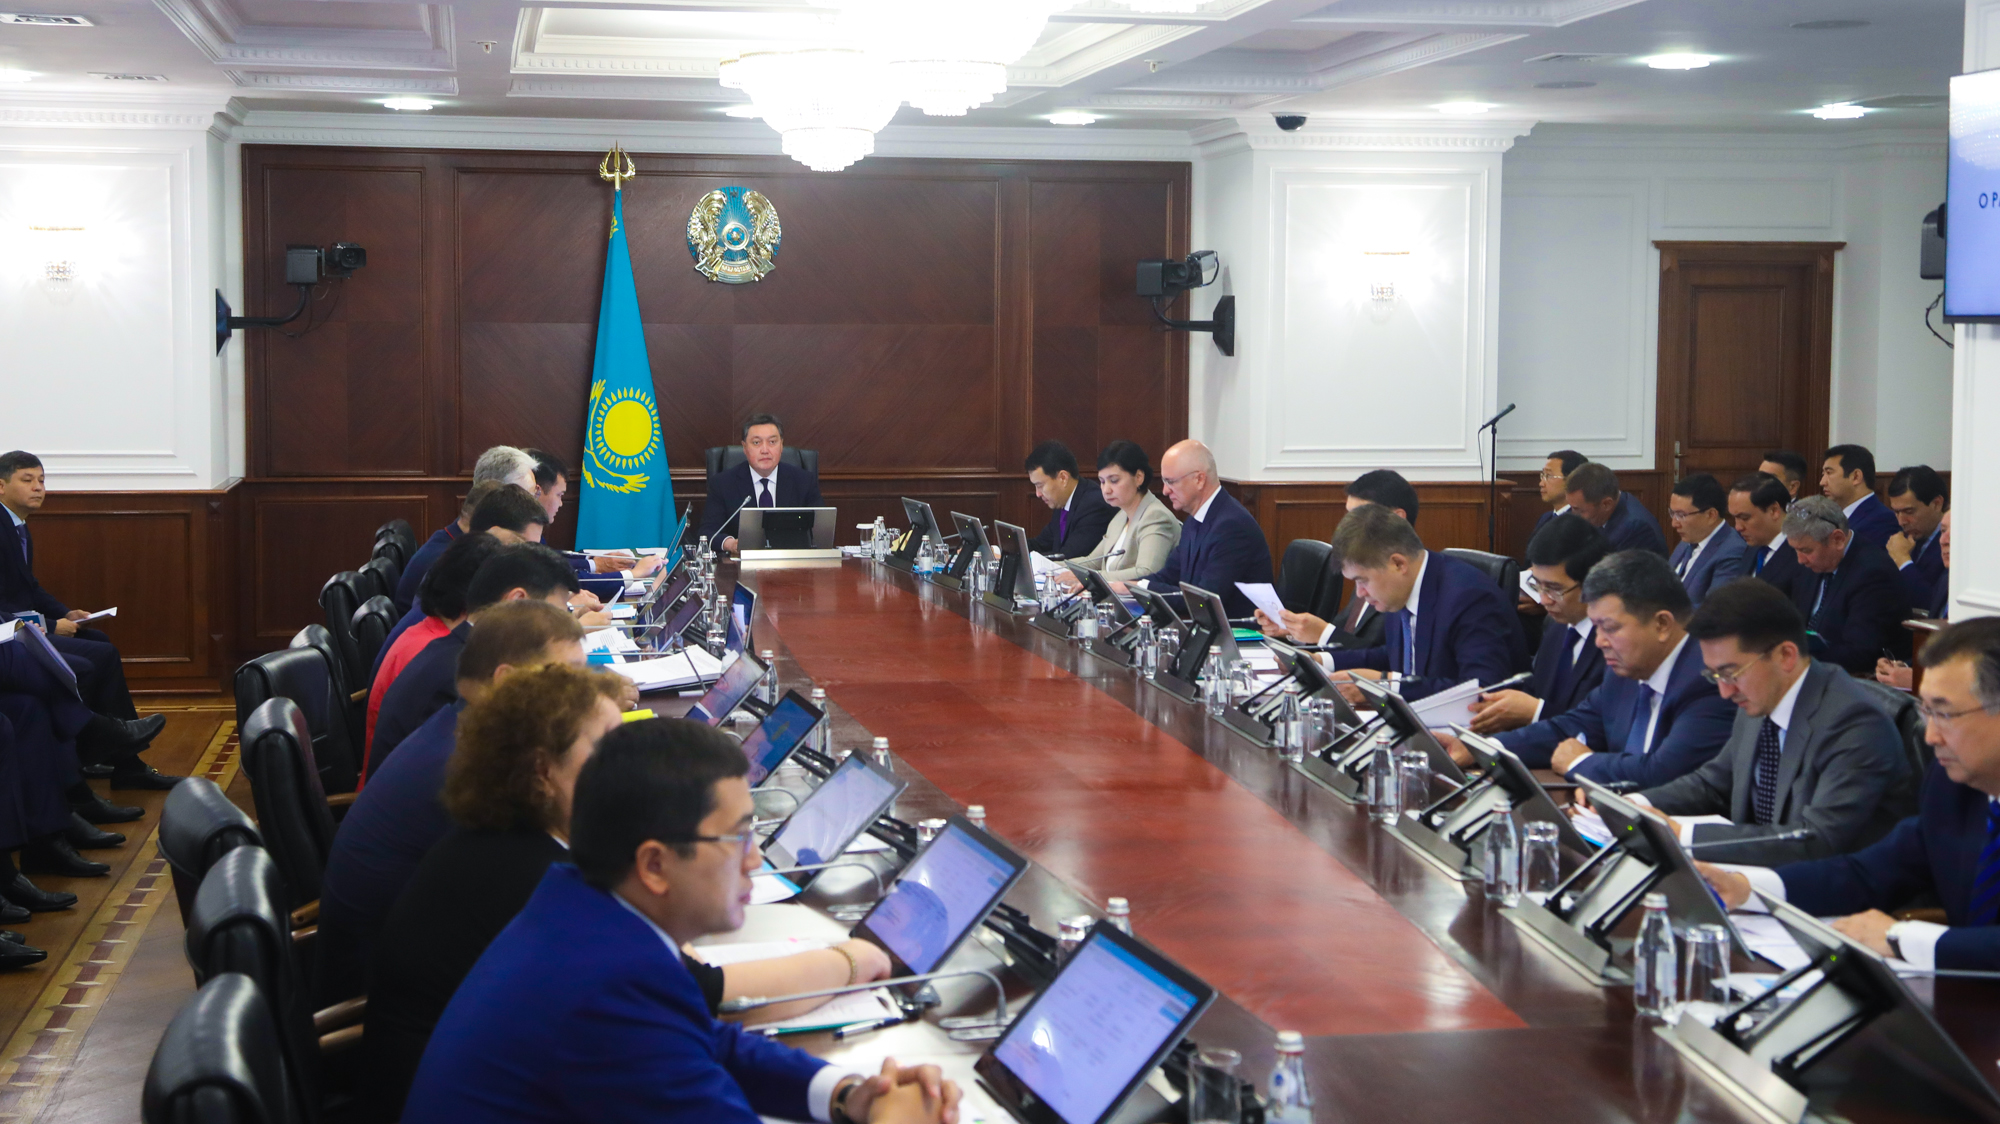 Government of Kazakhstan optimized project for LRT construction in Nur-Sultan